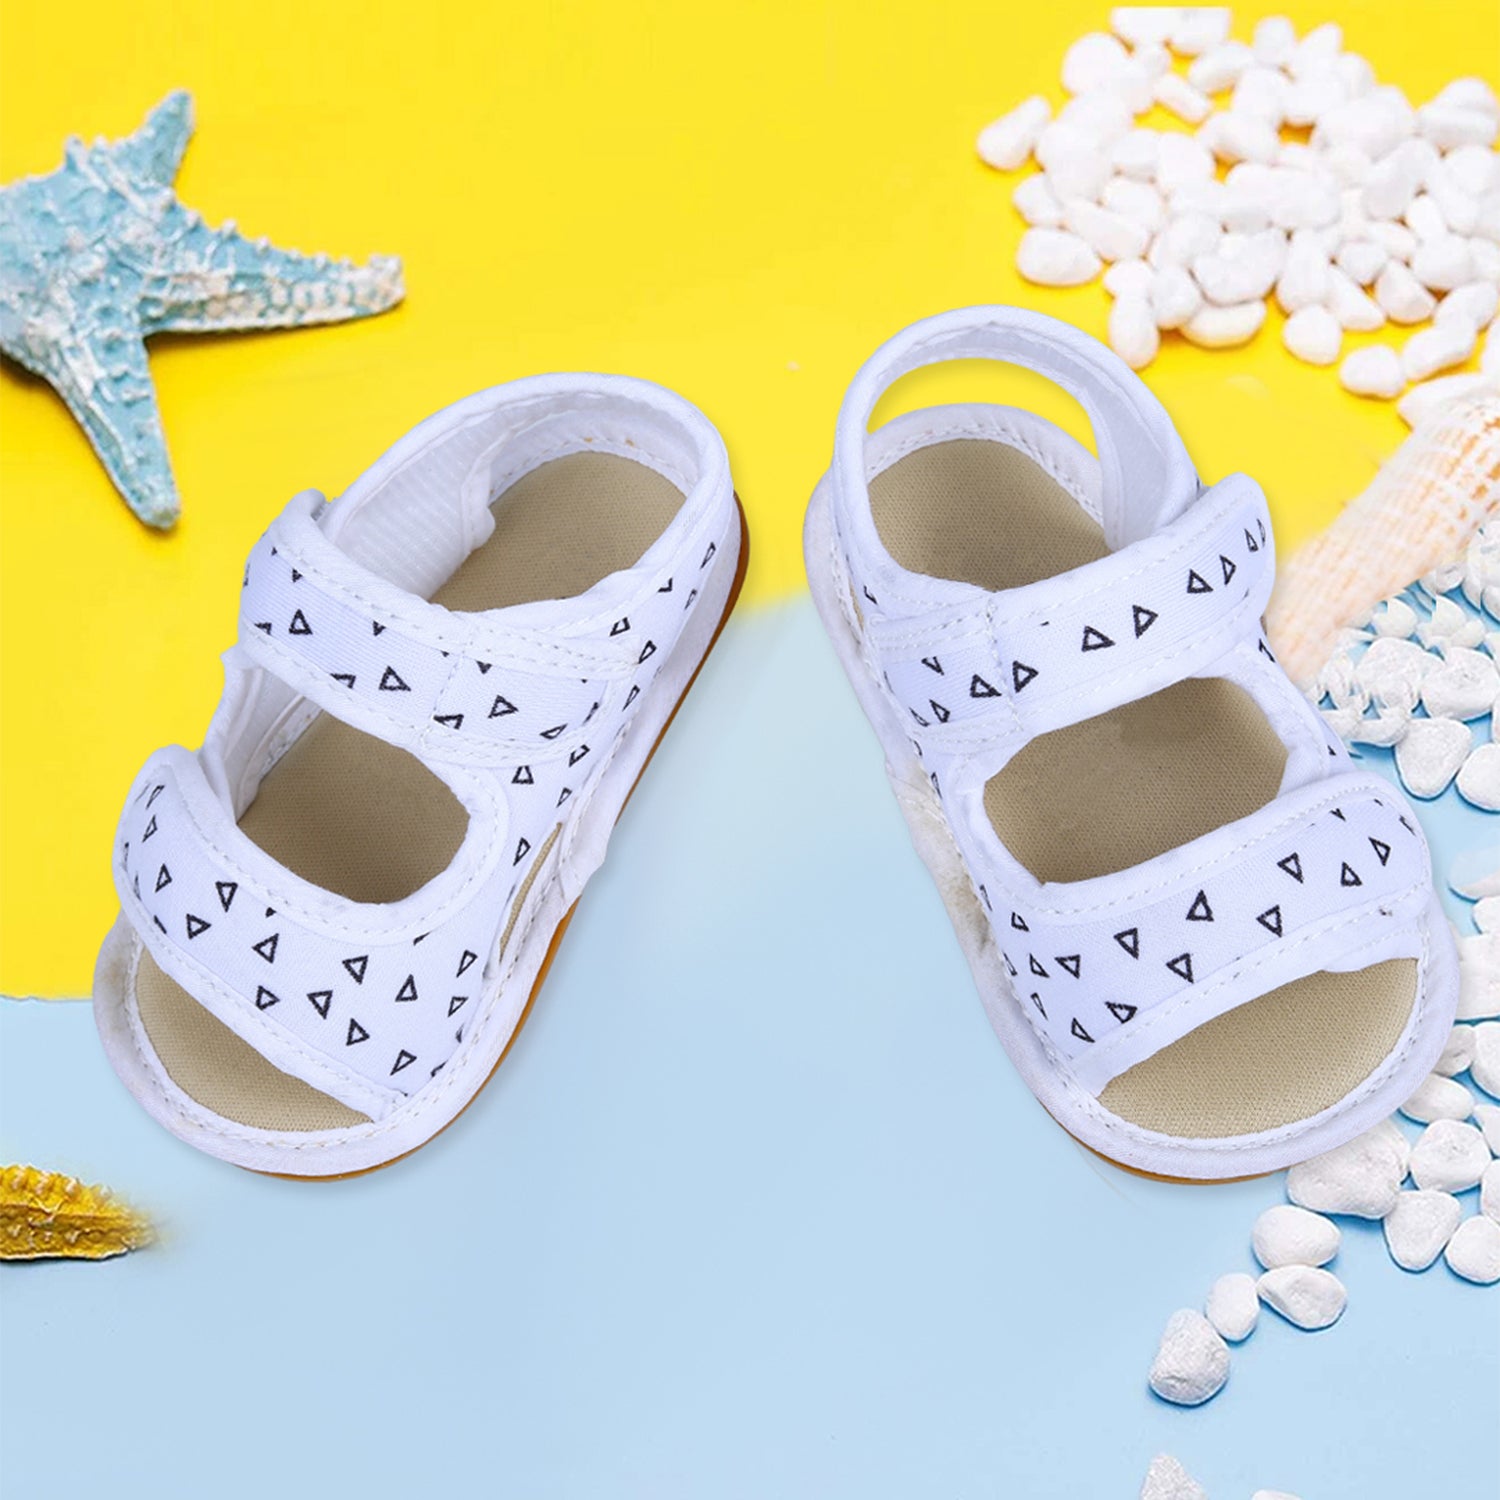 Triangle Comfortable Anti-skid Floater Sandals - White - Baby Moo